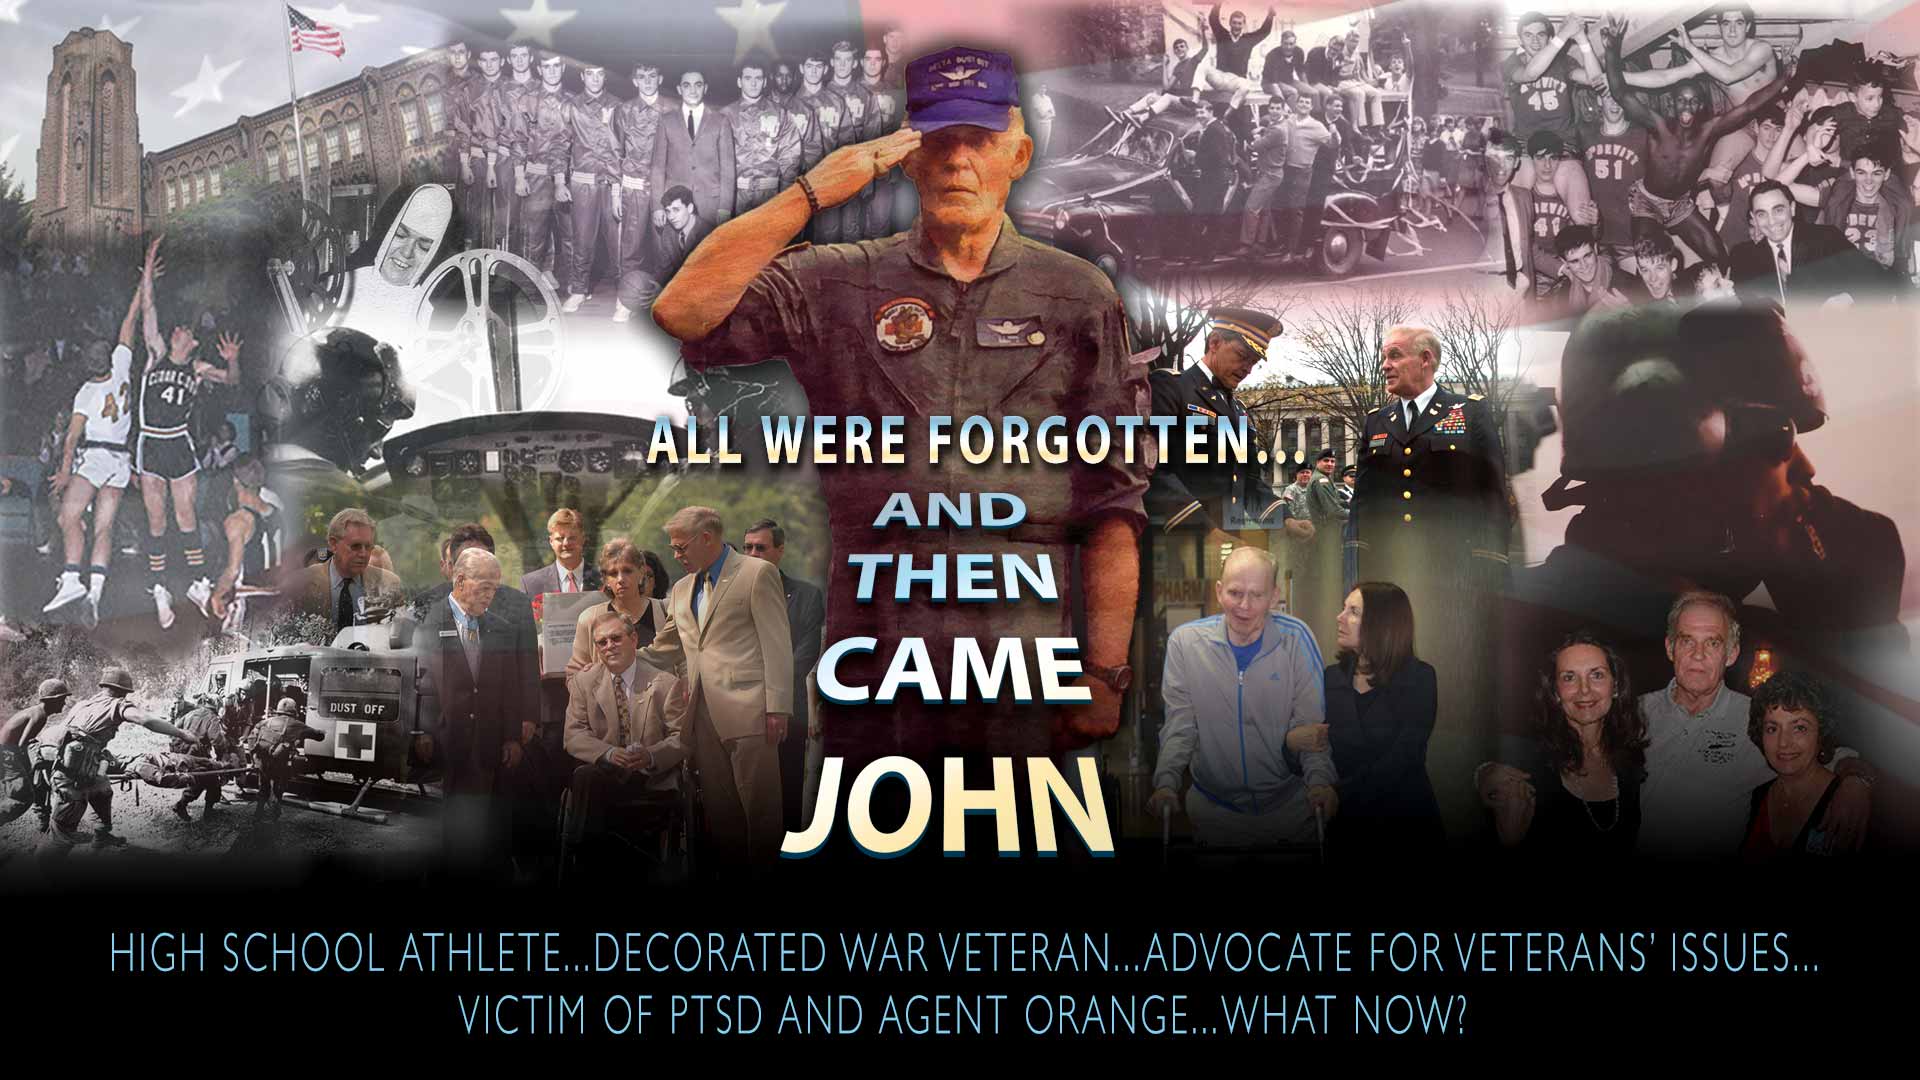 All Were Forgotten And Then Came John